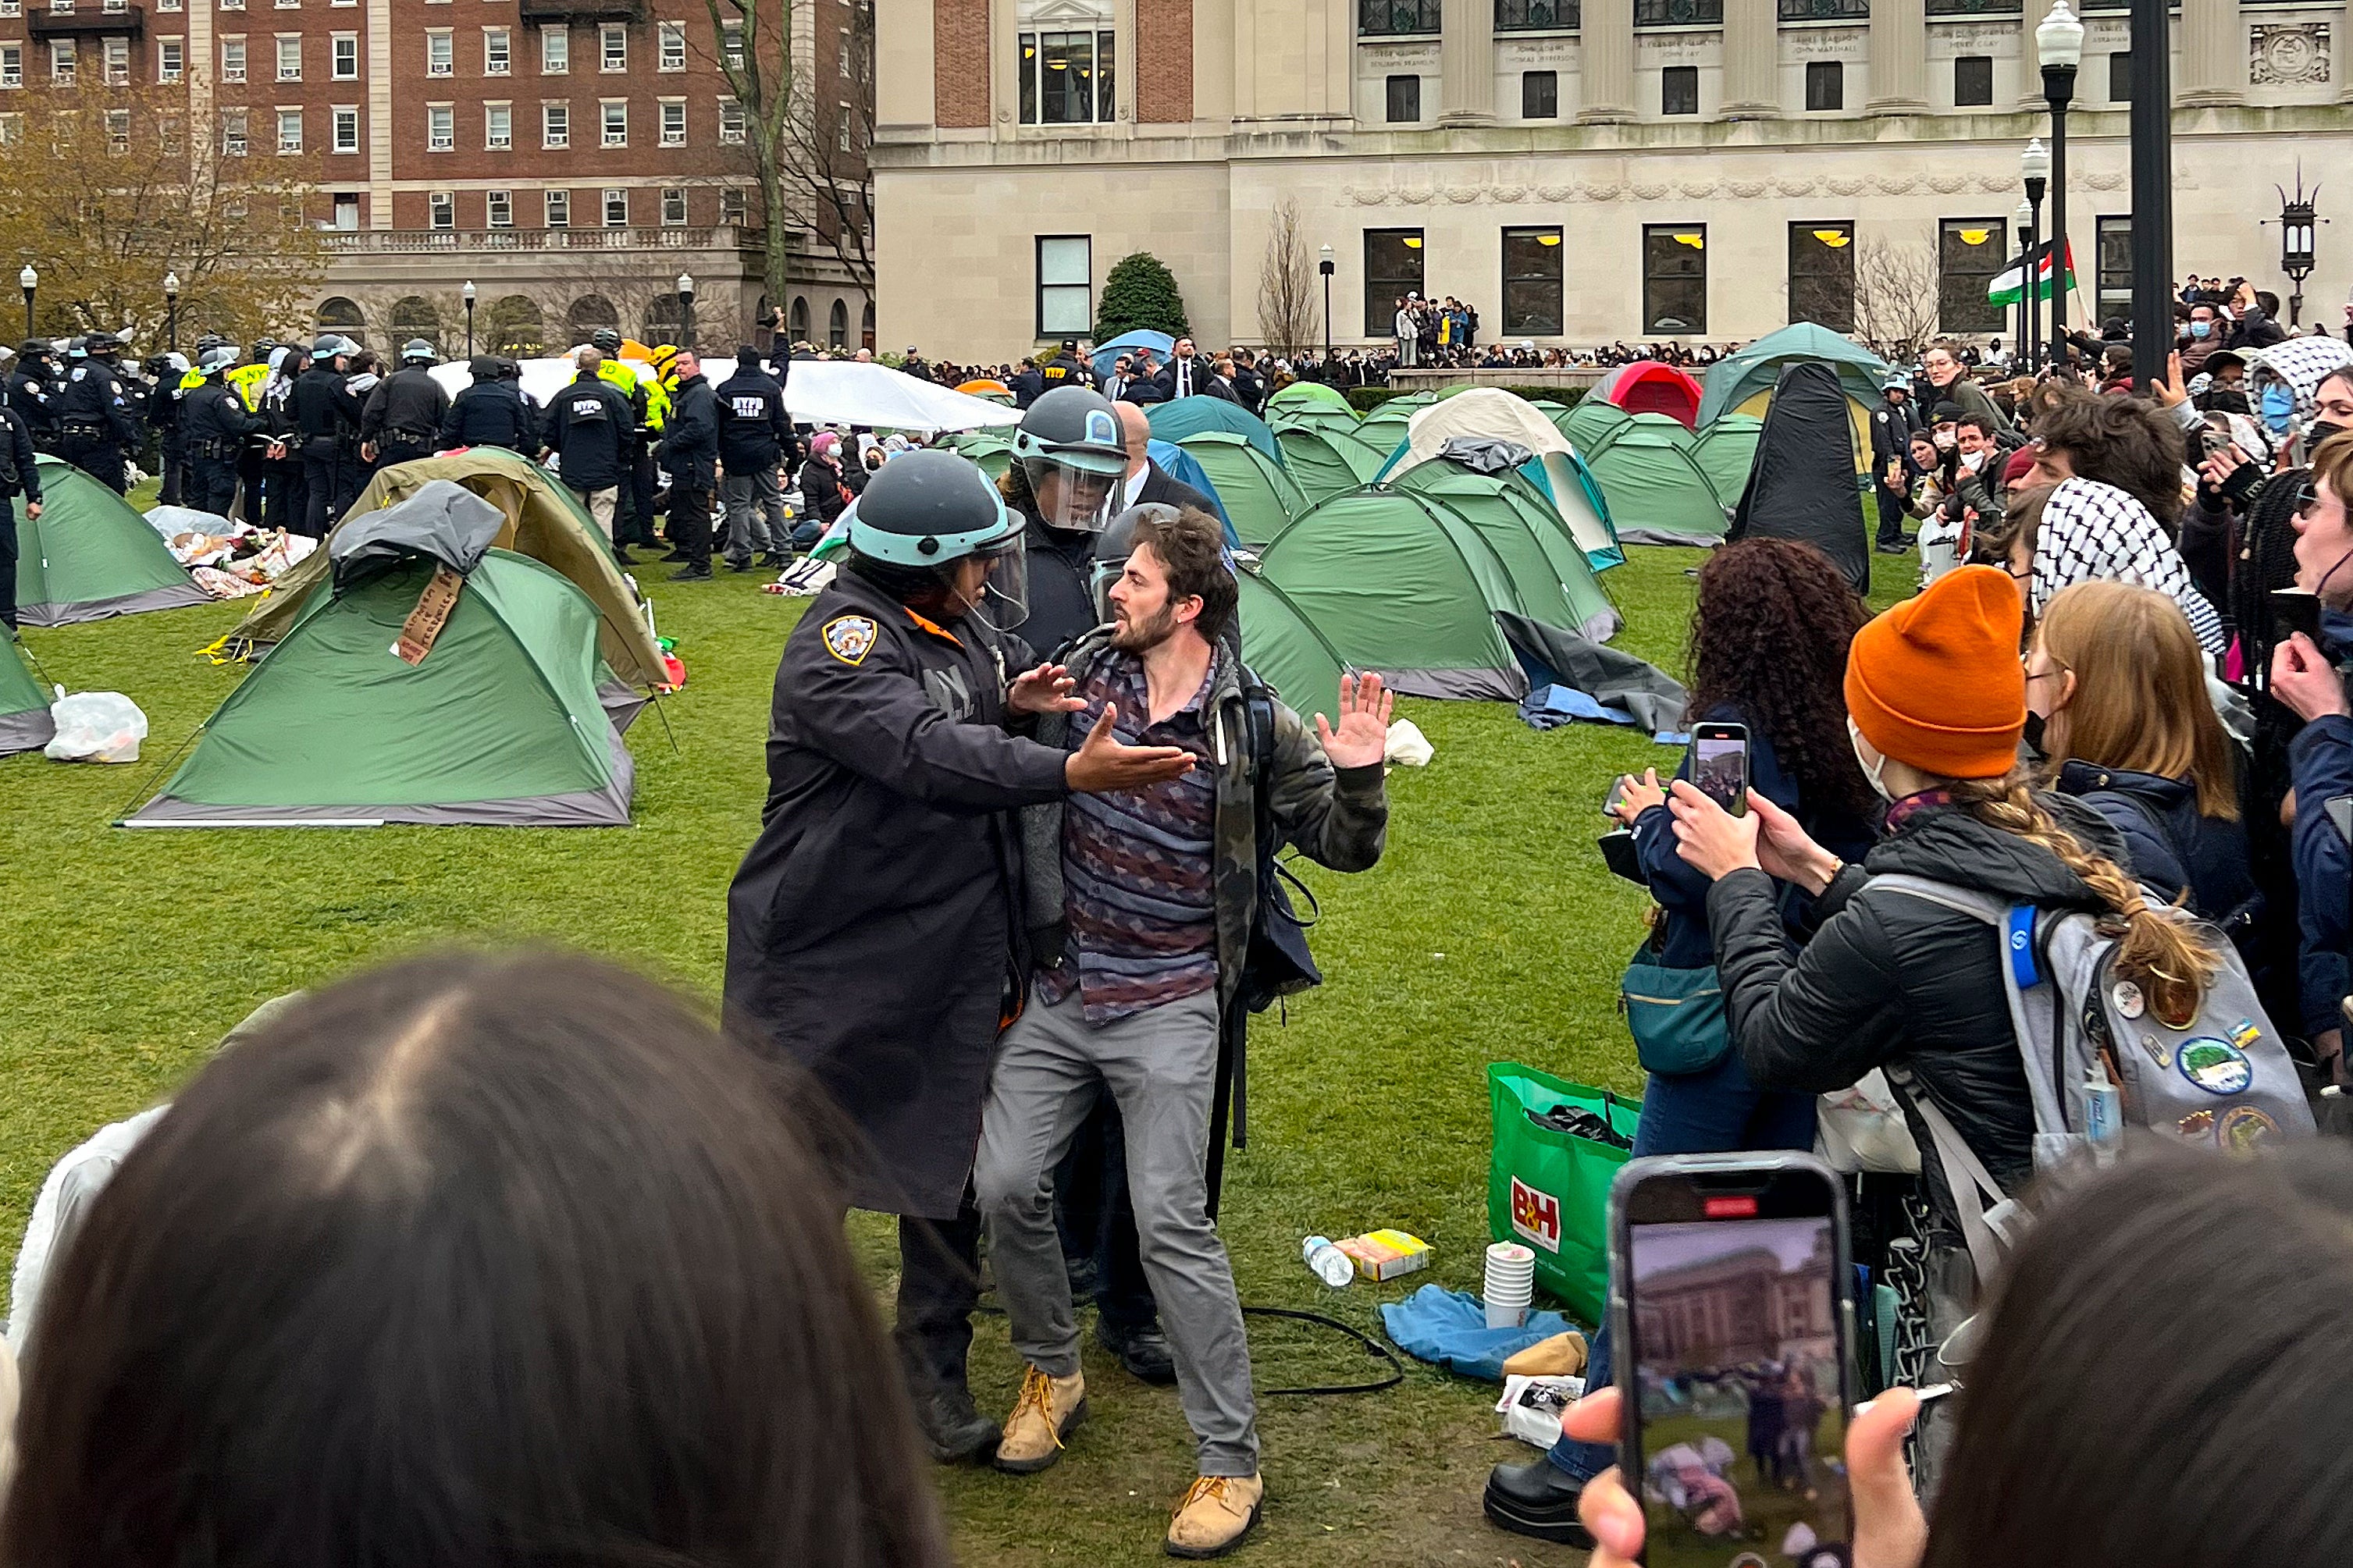 New York Police officers arrest a protestor who participated in an encampment on the Columbia University campus